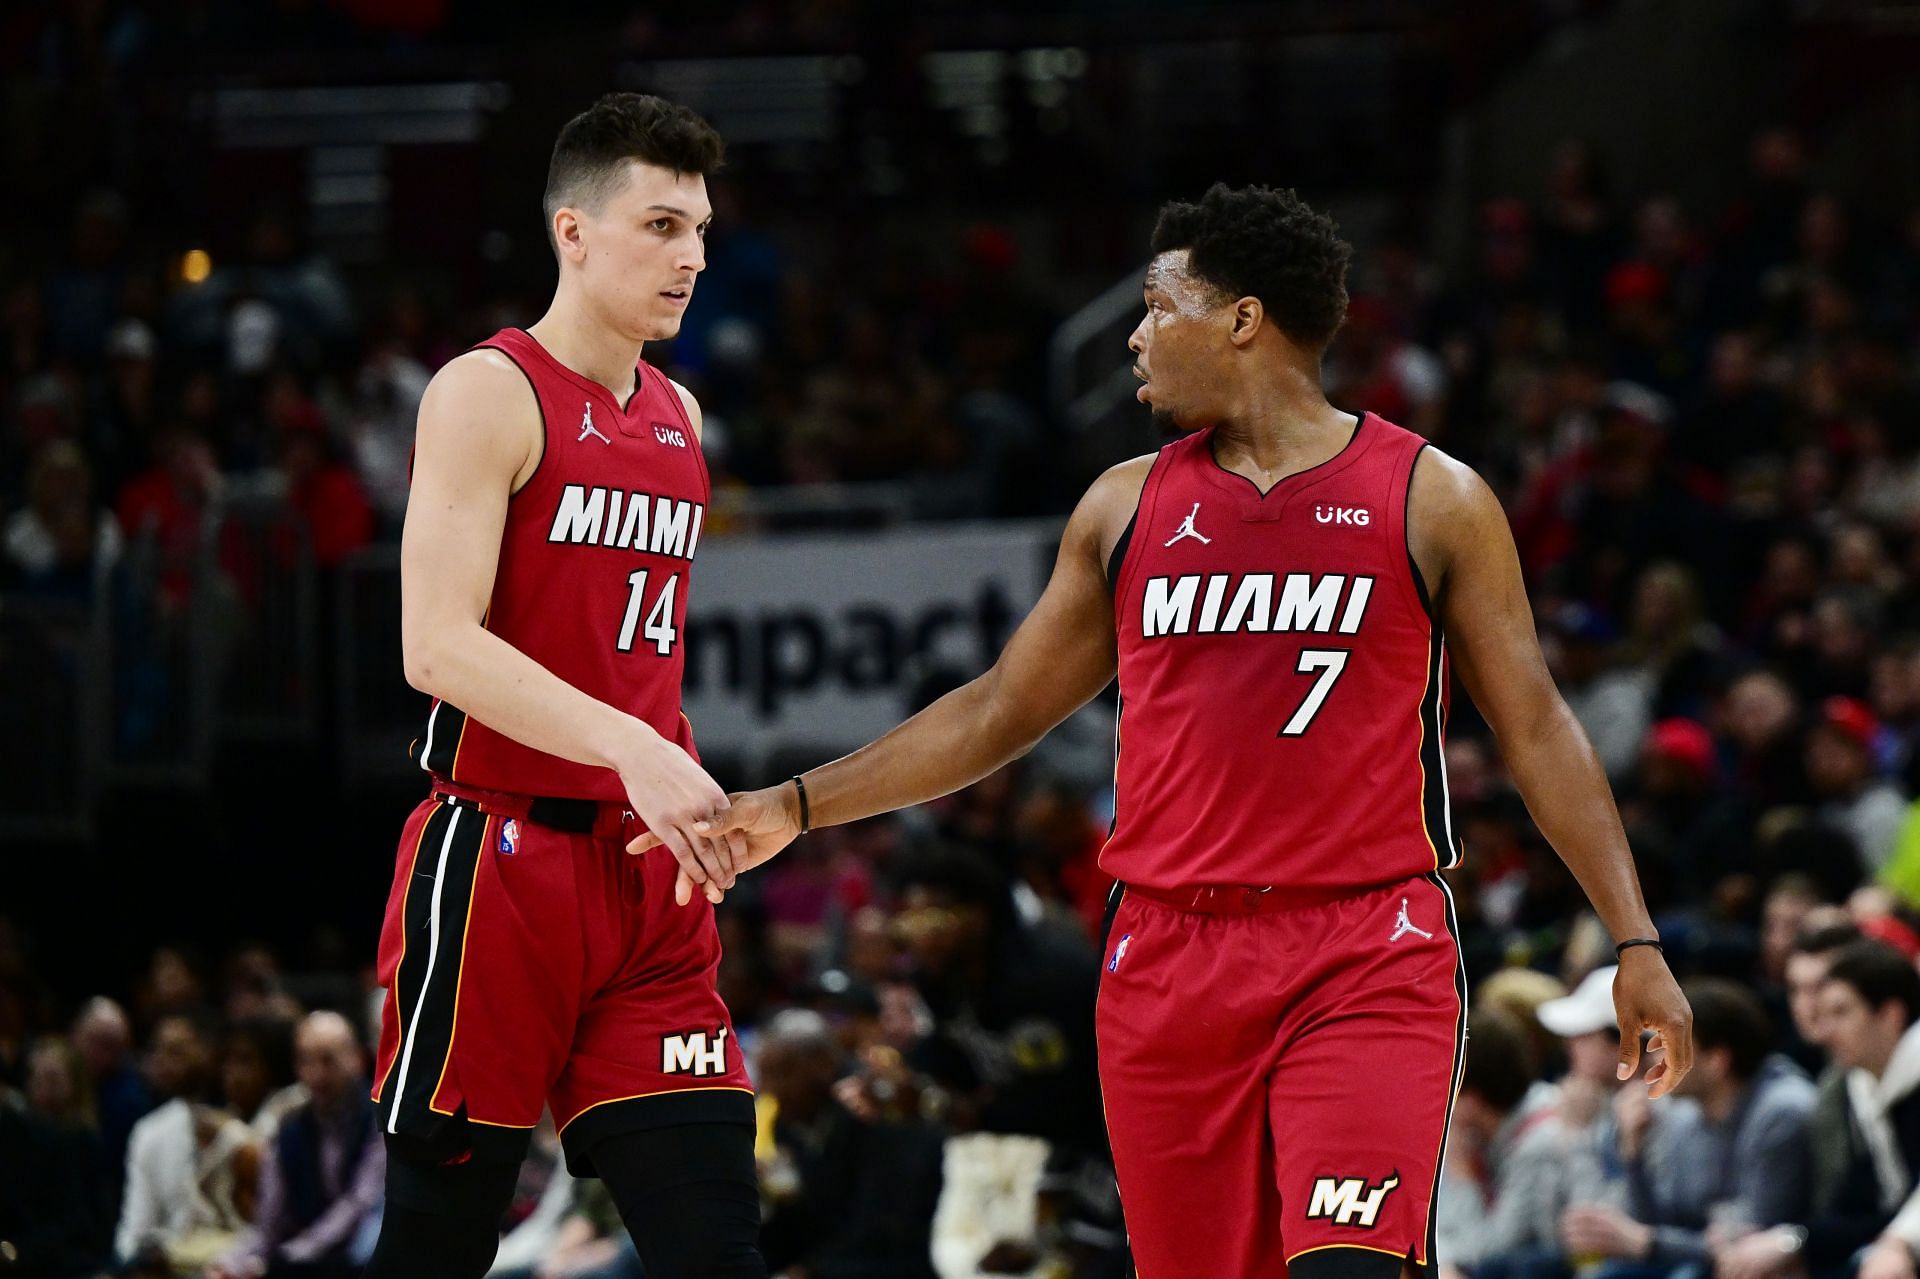 The Miami Heat are one of the best teams in the Eastern Conference